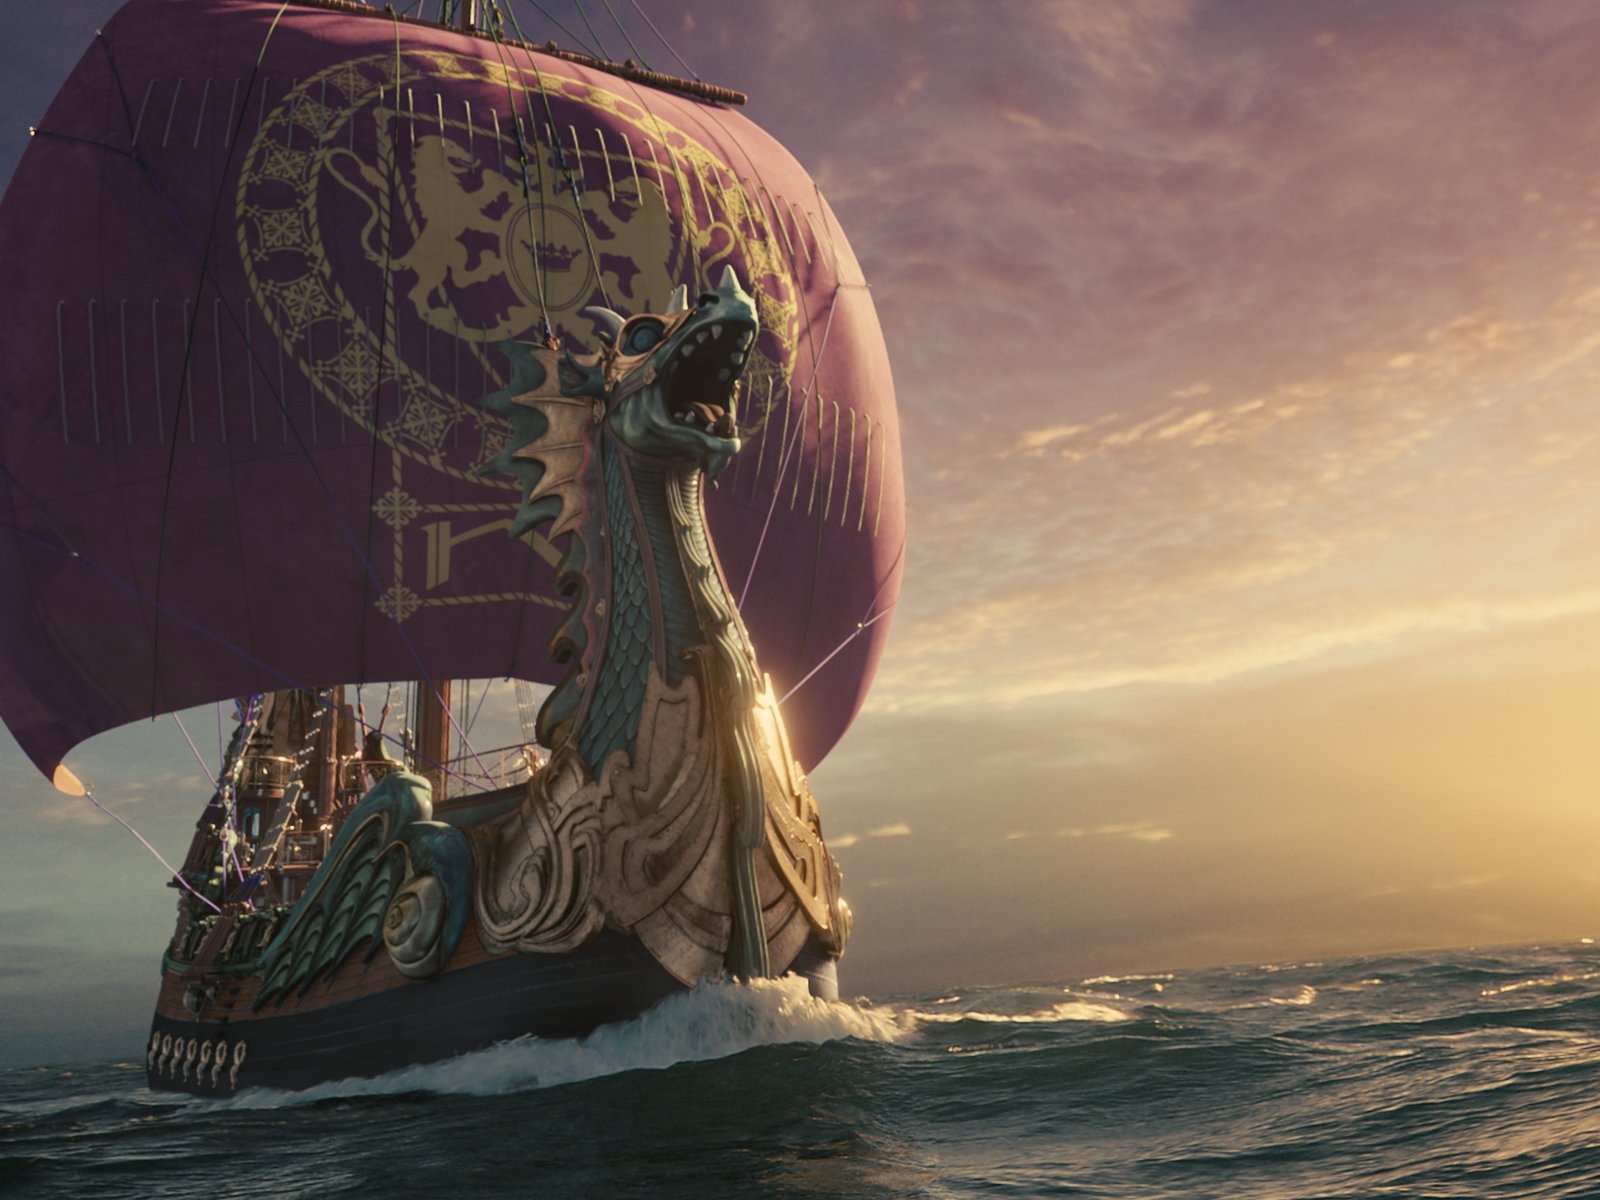 The Chronicles of Narnia: The Voyage of the Dawn Treader wallpapers #4 - 1600x1200